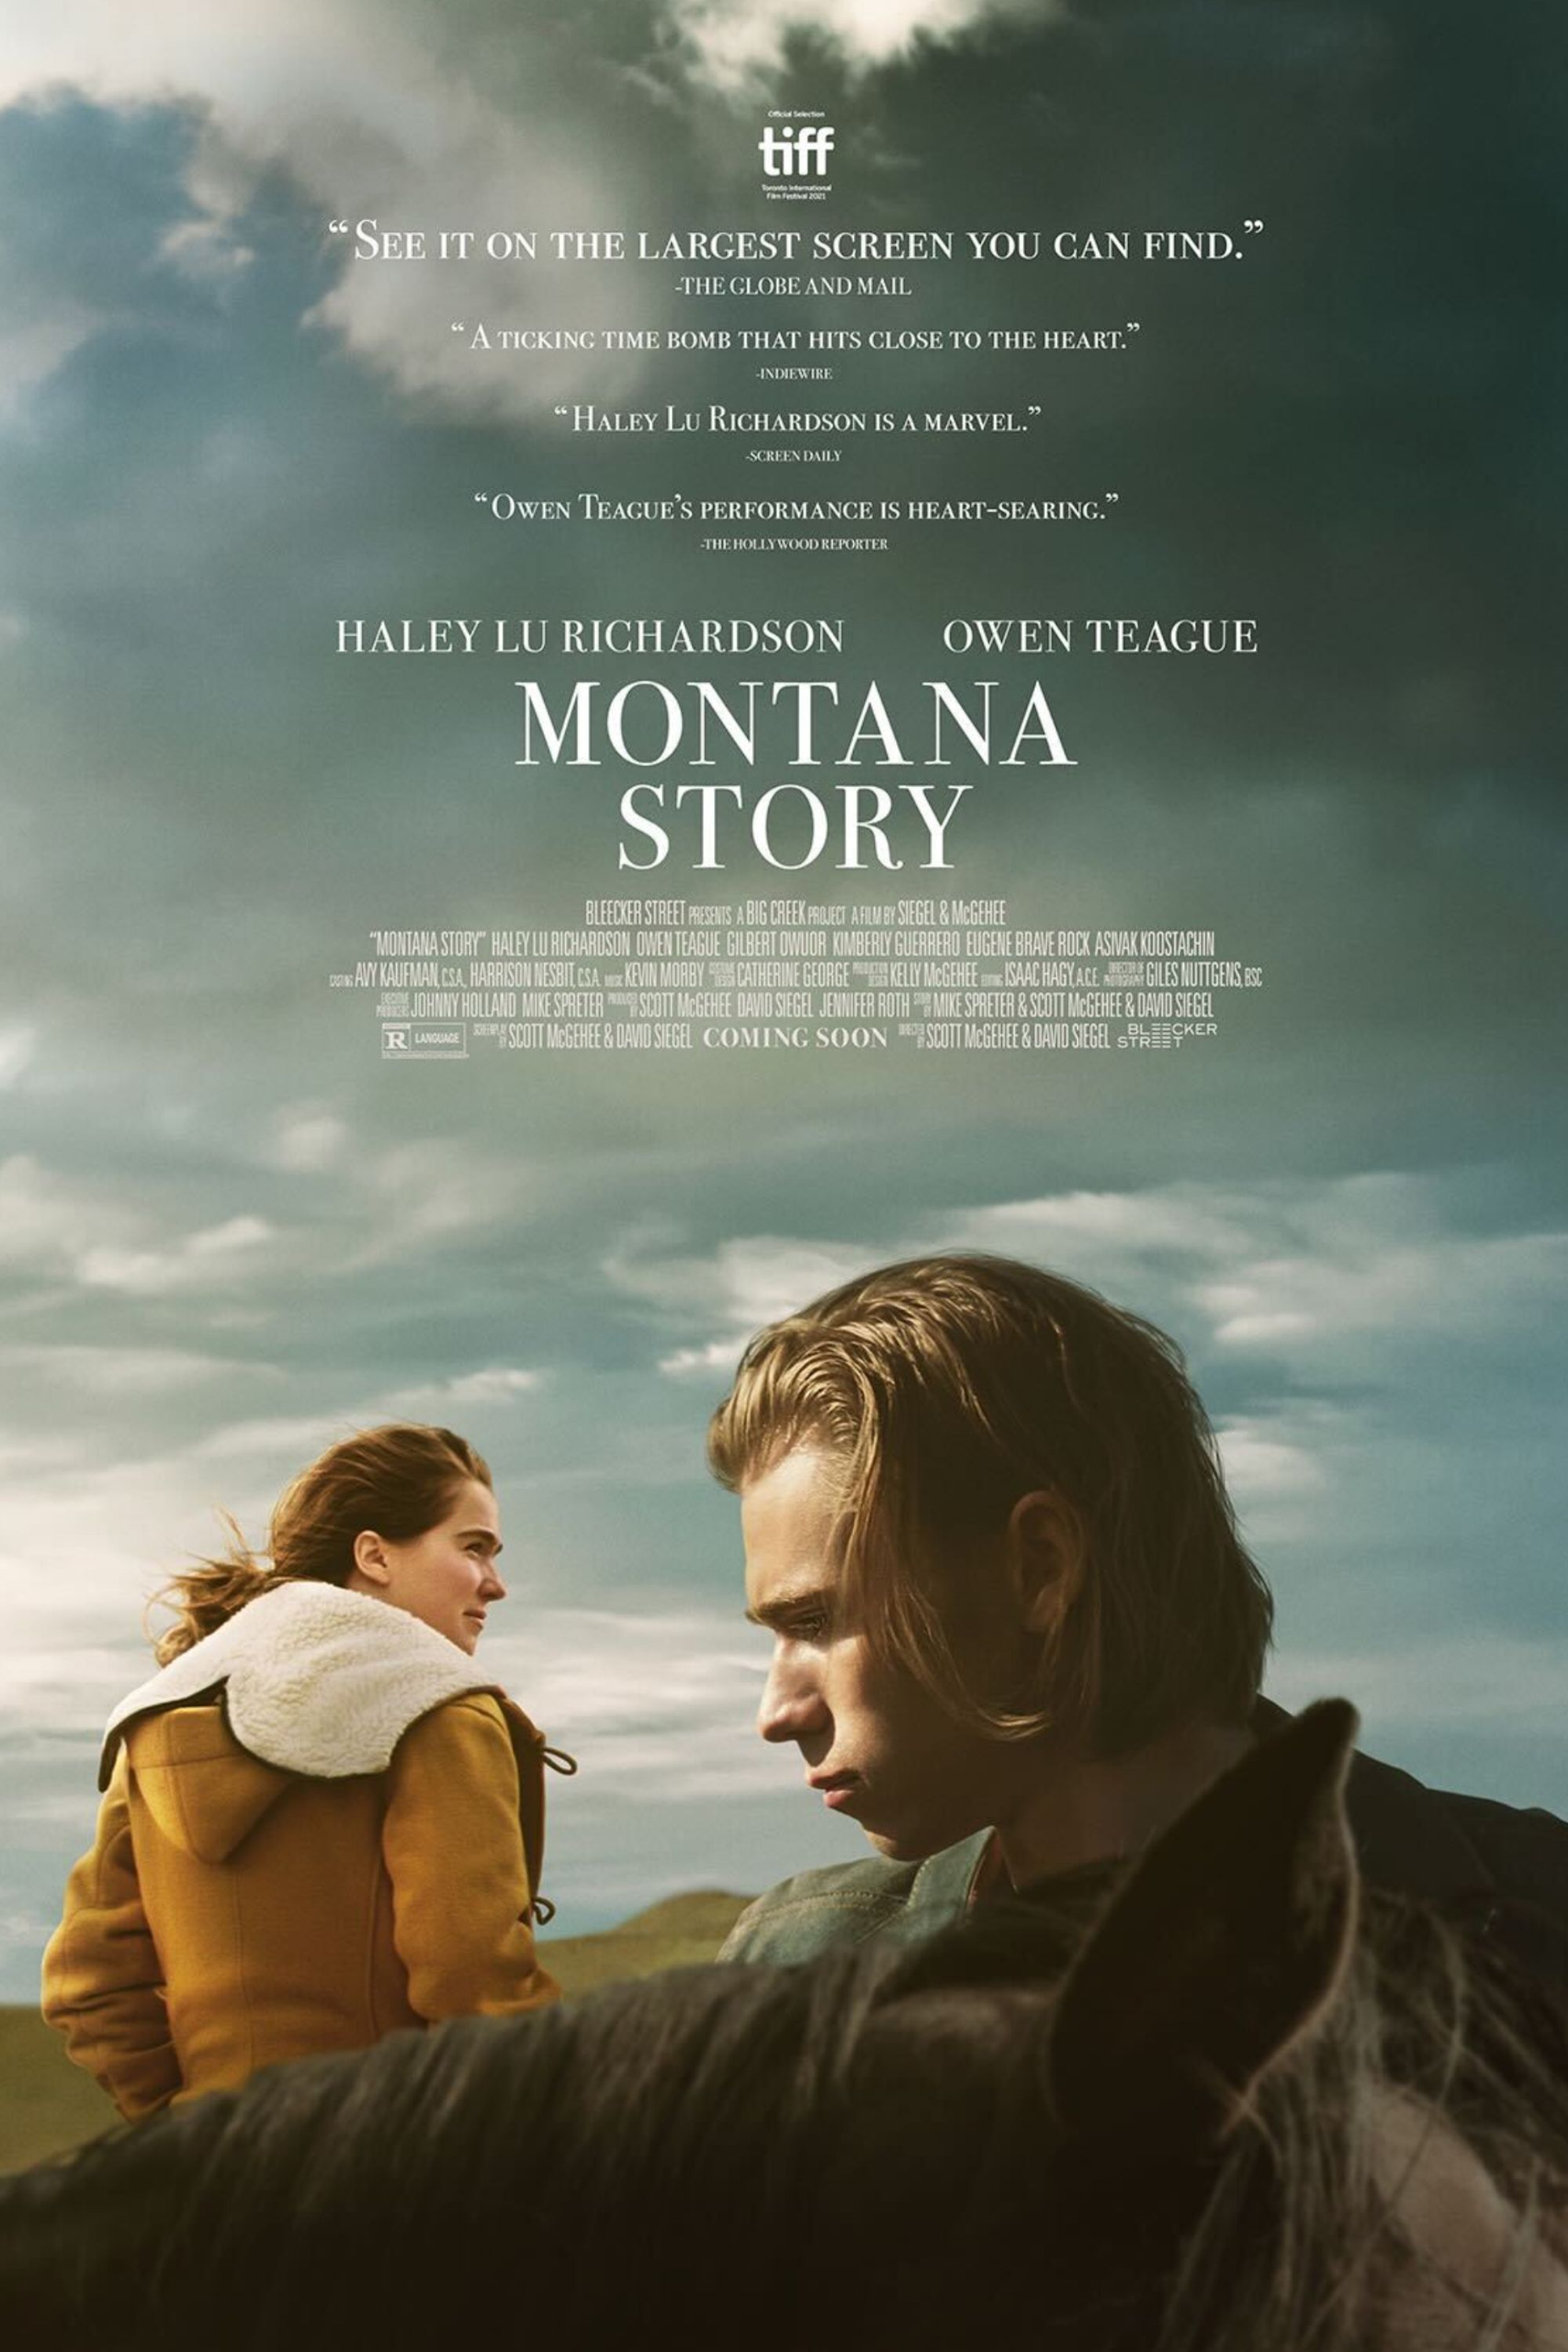 Owen Teague as Cal and Haley Lu Richardson as Erin standing in a field in Montana in Montana Story